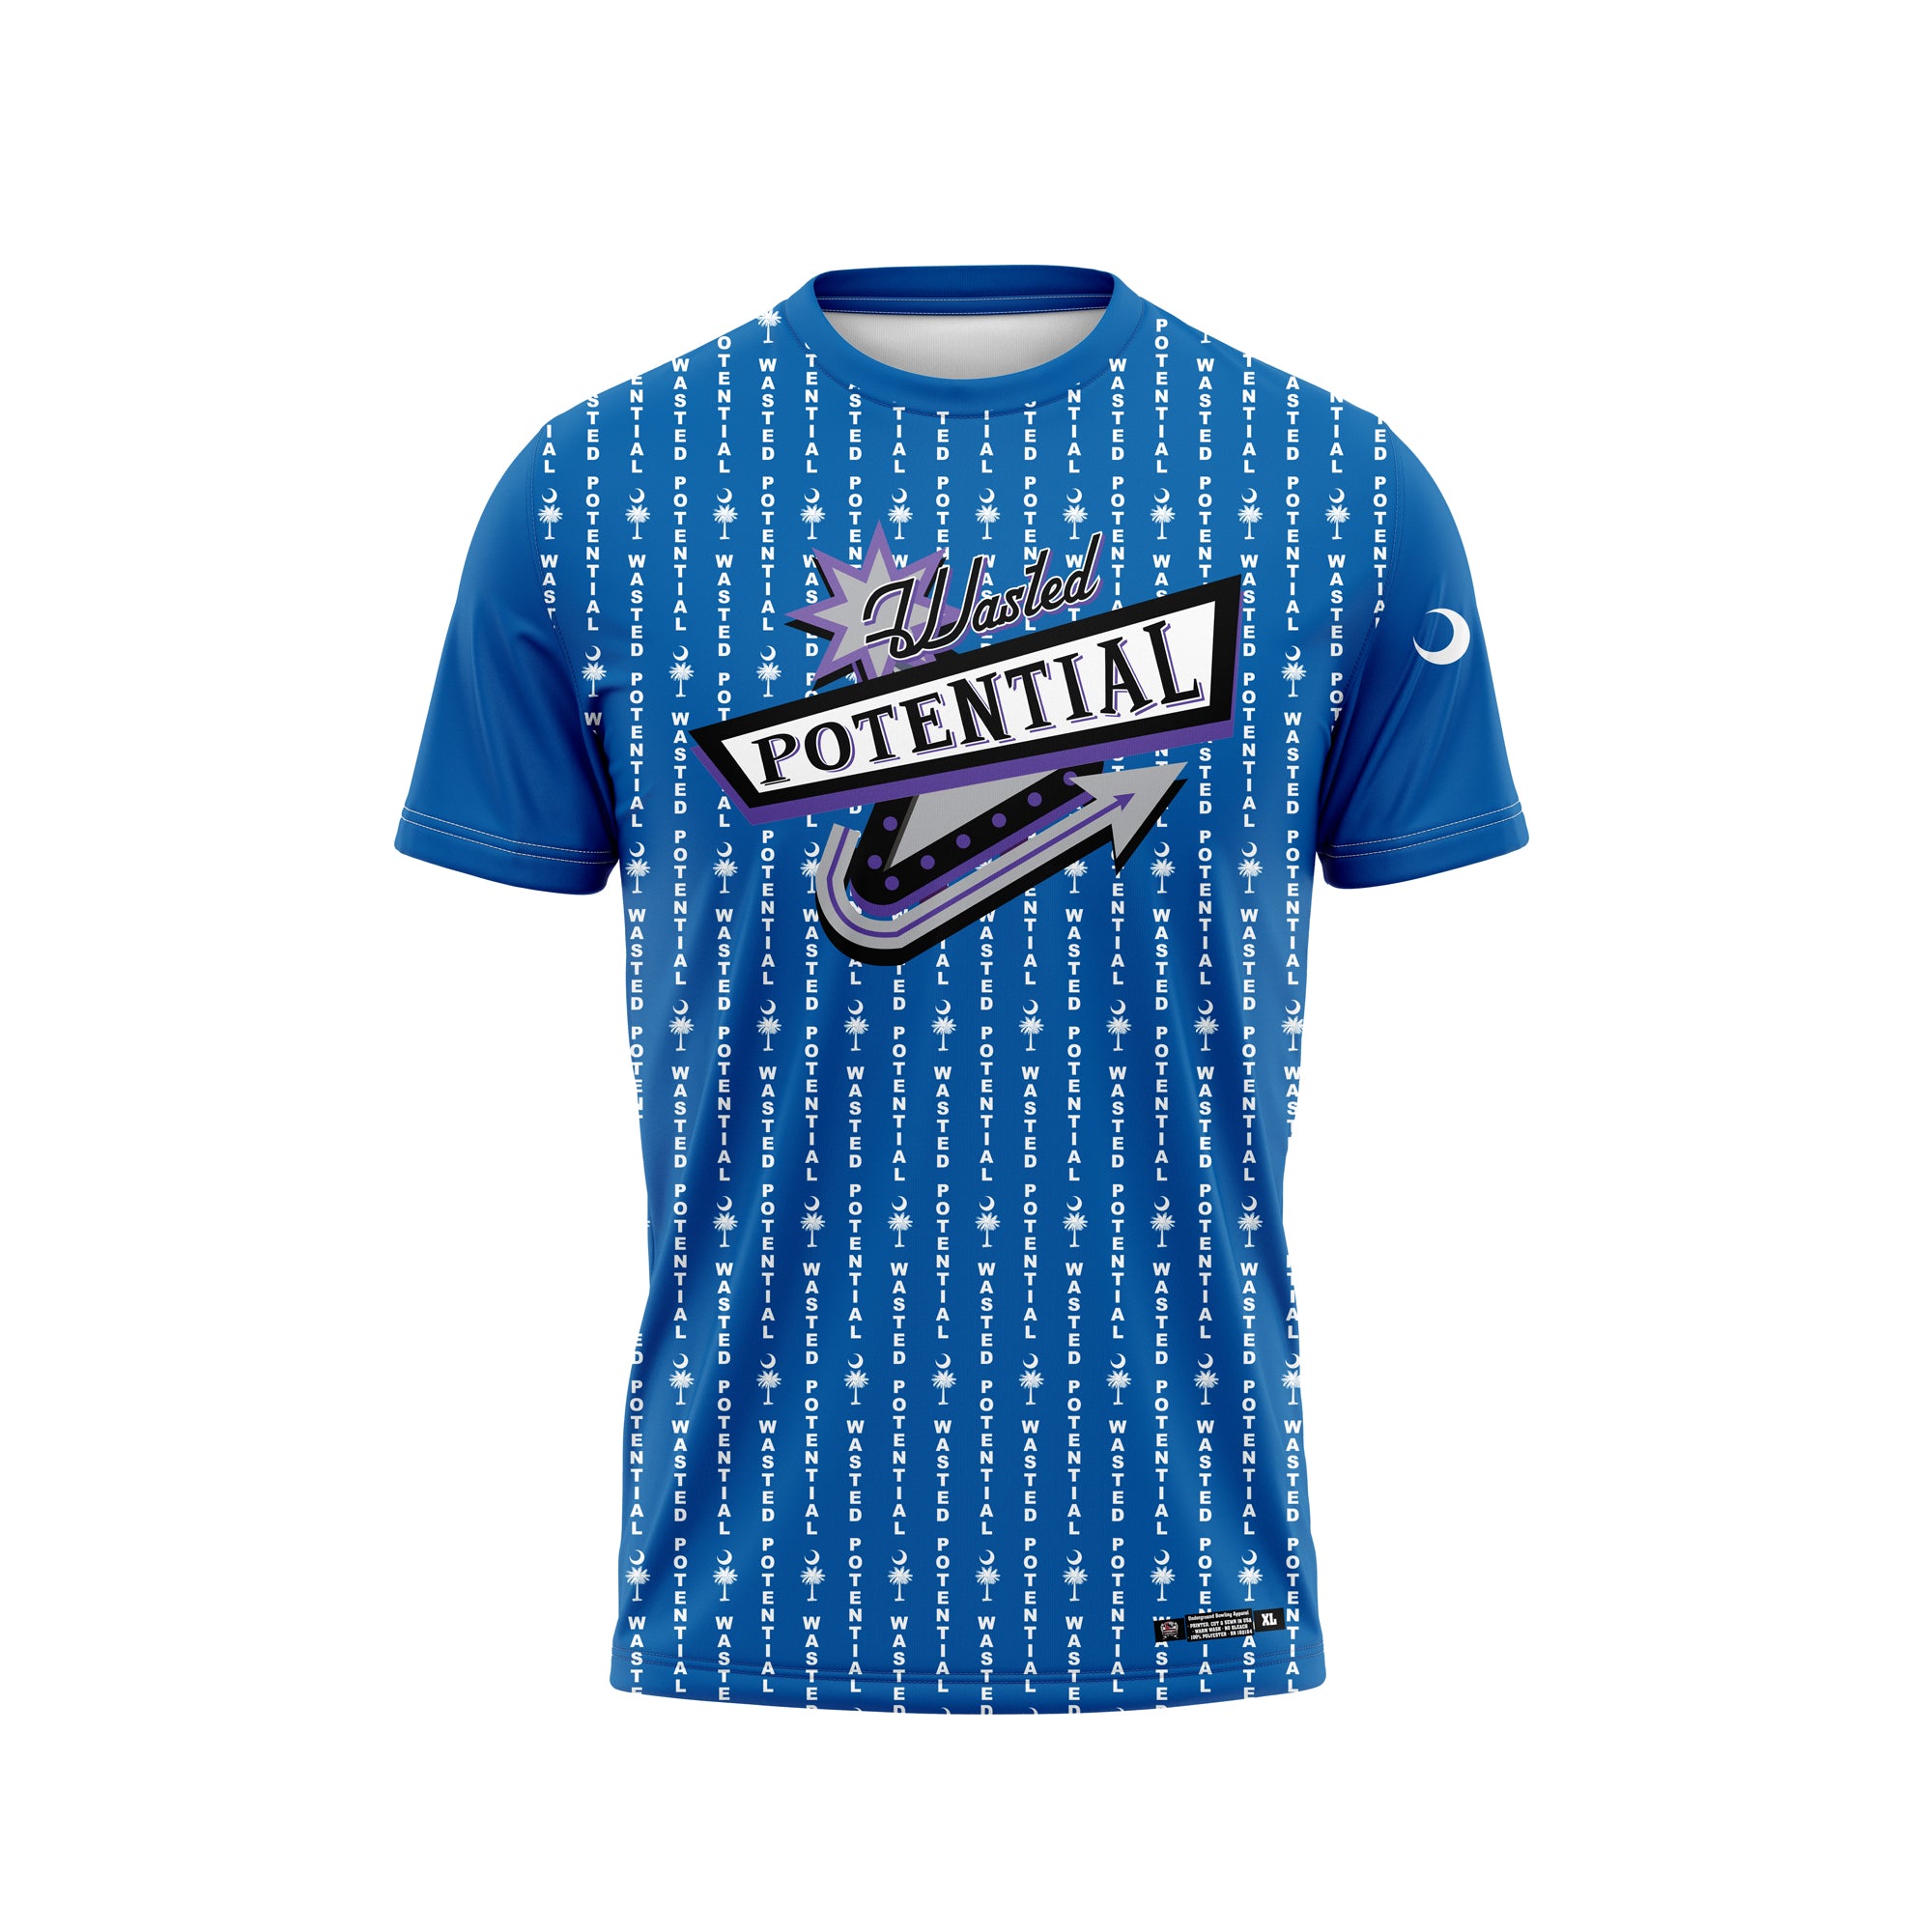 Wasted Potential Palmetto Blues Jerseys